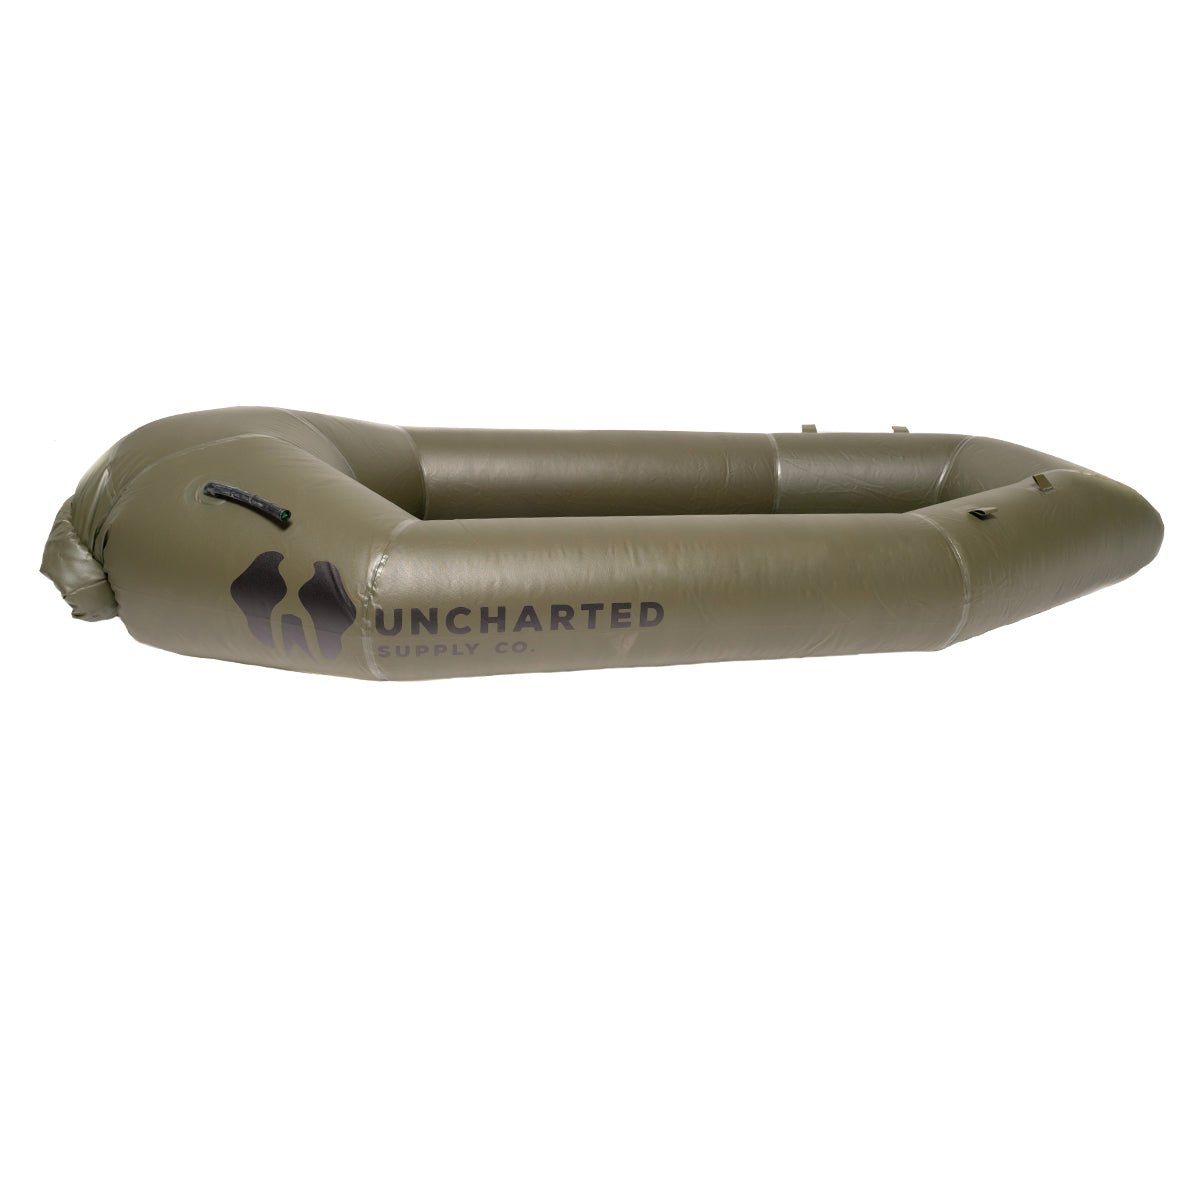 Uncharted Supply Co. Rapid Raft in  by GOHUNT | Uncharted Supply Co. - GOHUNT Shop